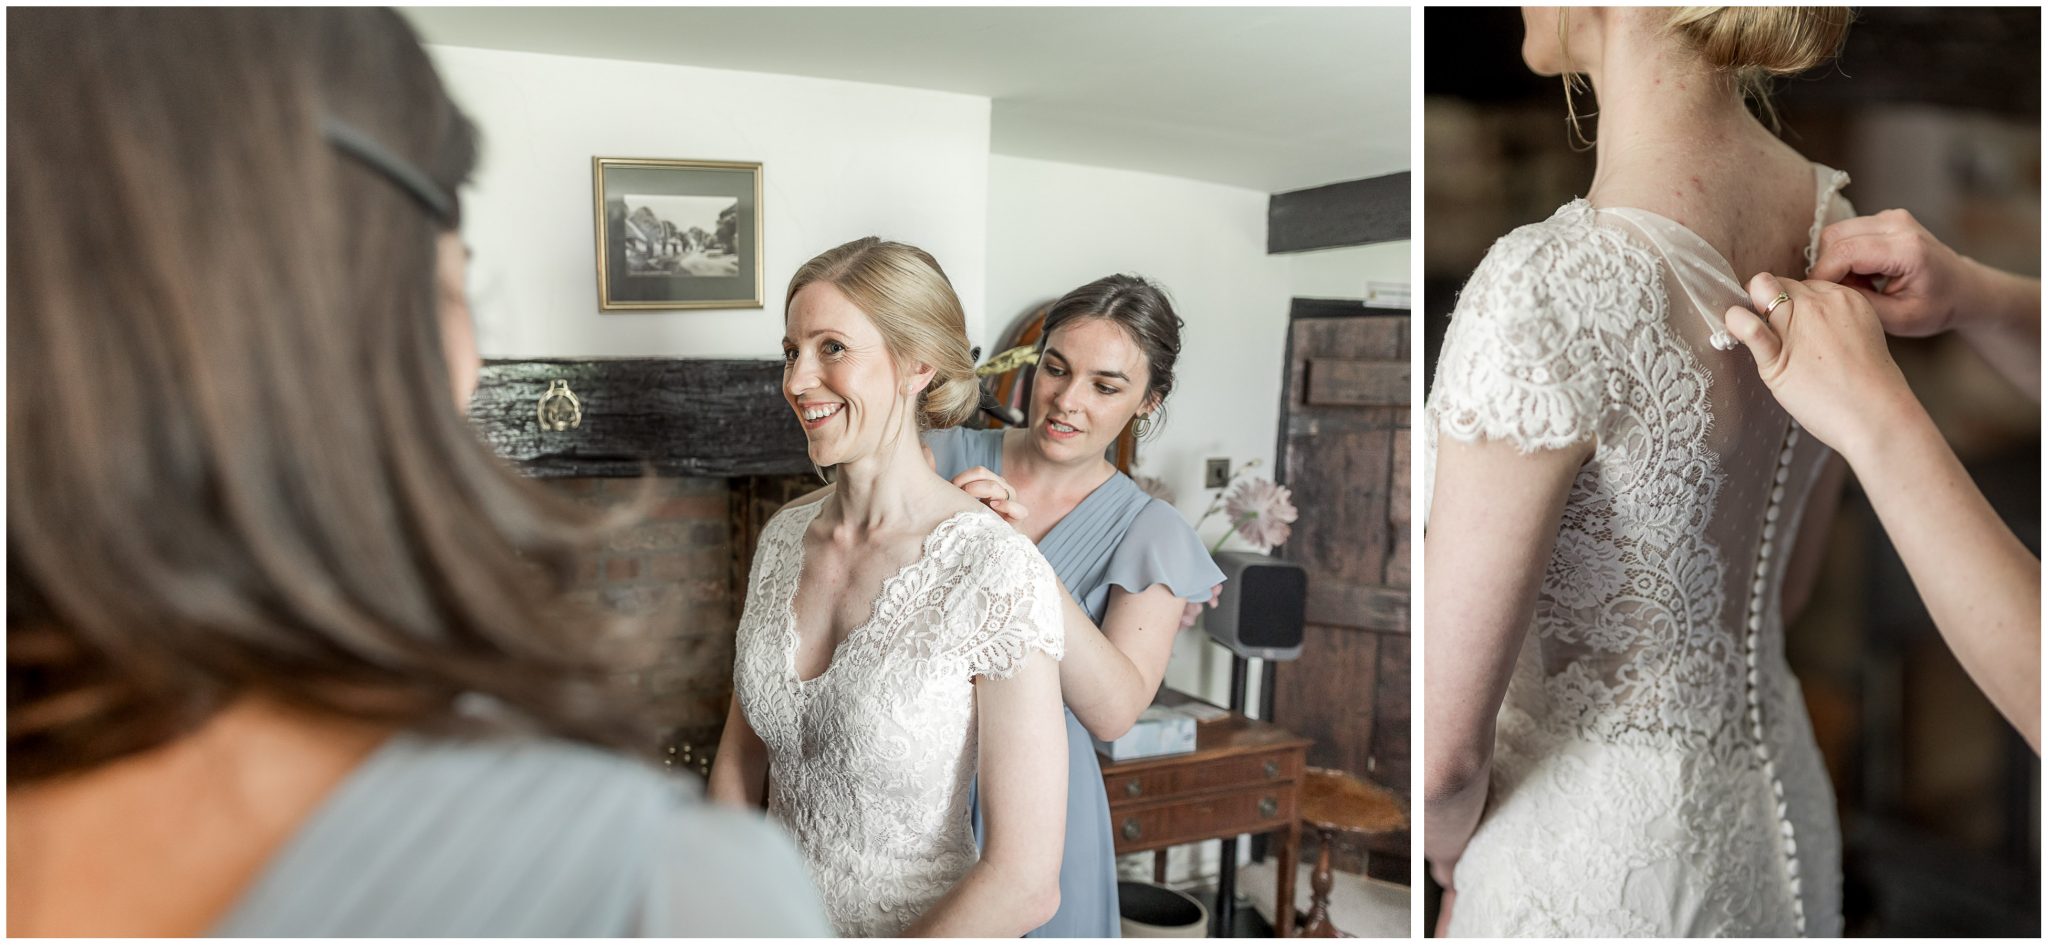 Bride getting ready in Dorset cottage